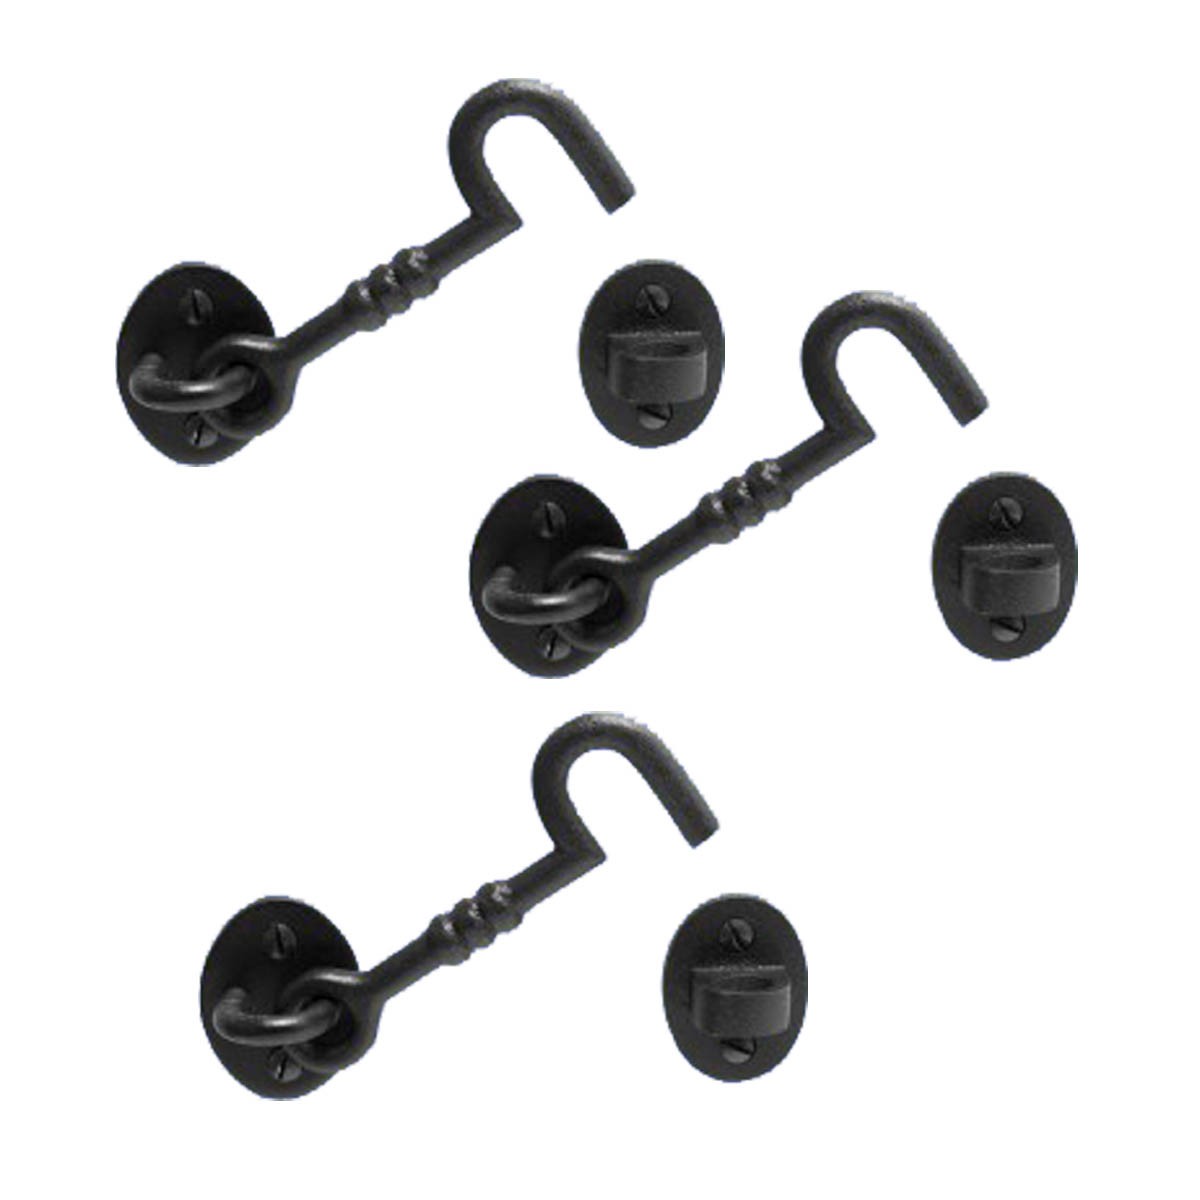 https://wroughtworks.com/images/wrought-iron/3-cabin-hook-black-wrought-iron-wrought-iron-cabin-hook-4-in-l.jpg